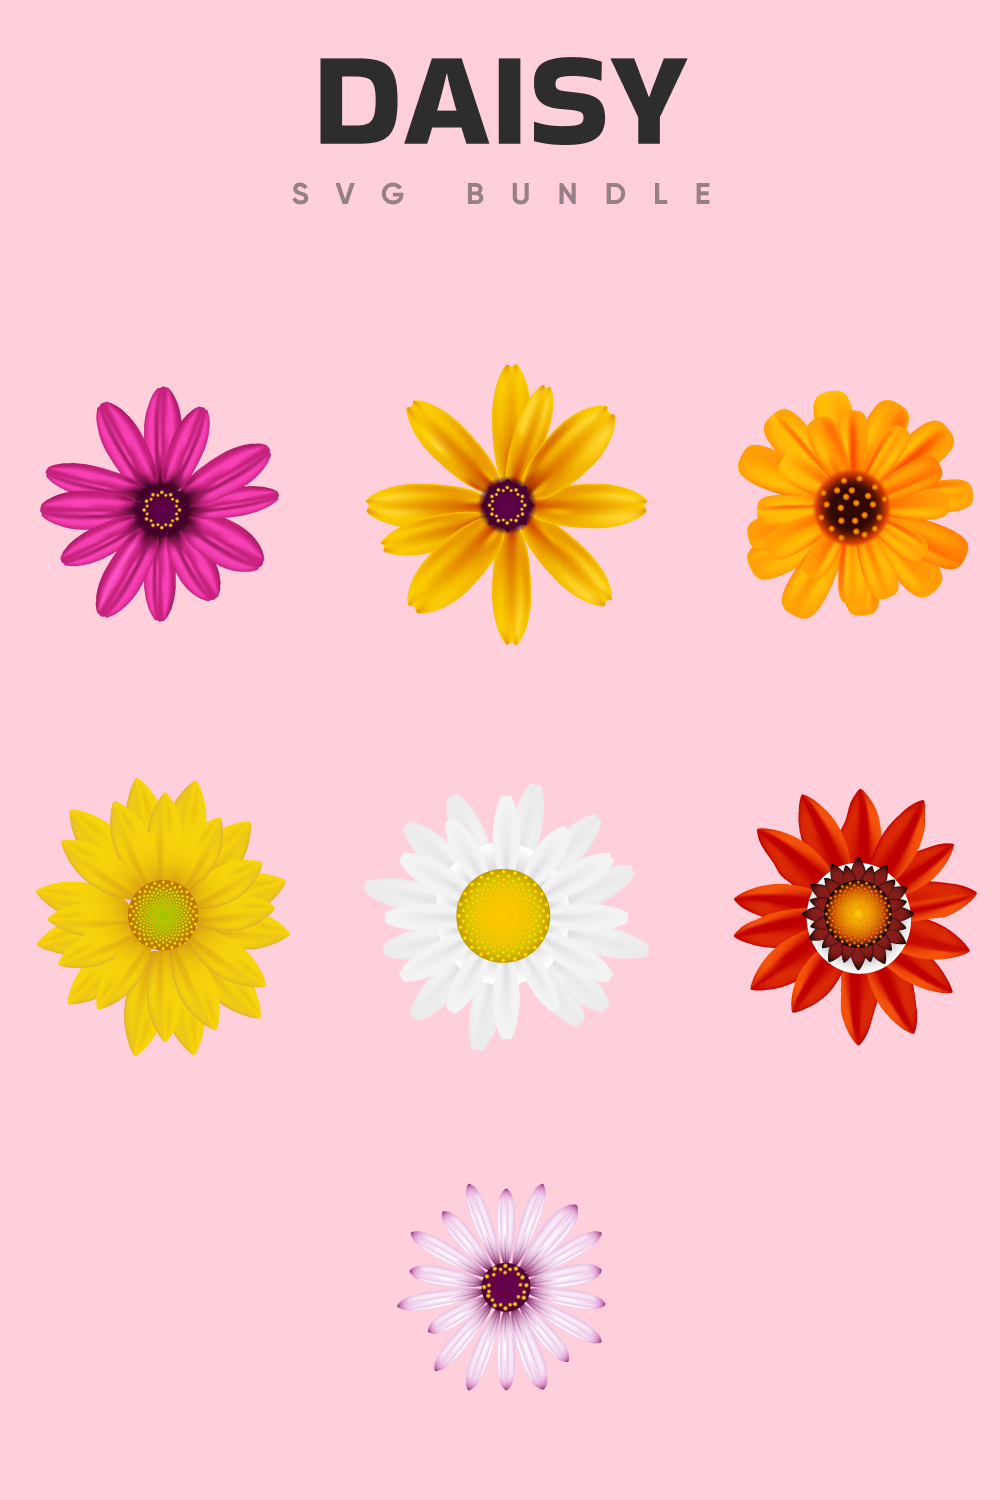 Cute daisies in the different colors.